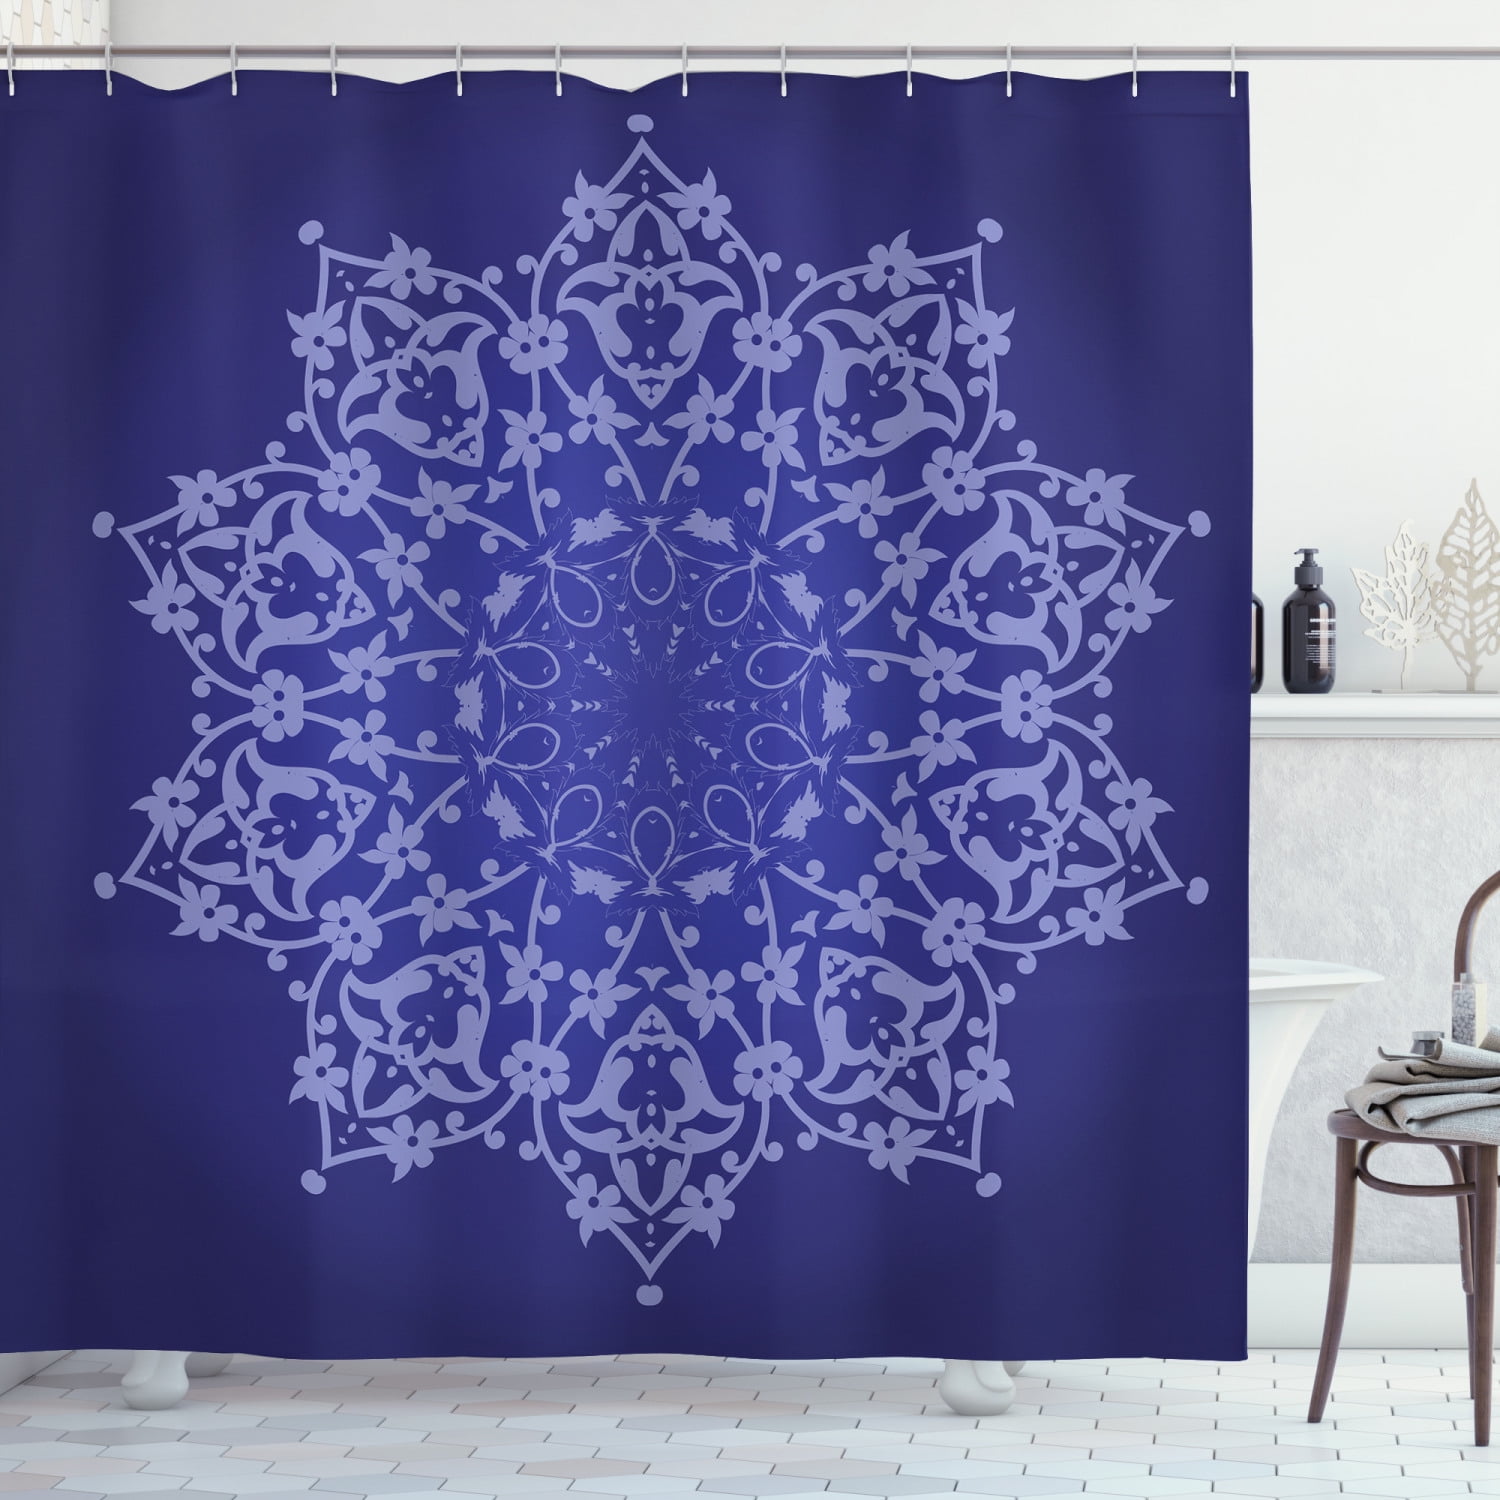 Details About Mandala Shower Curtain, Fabric Shower Curtain No Liner Needed